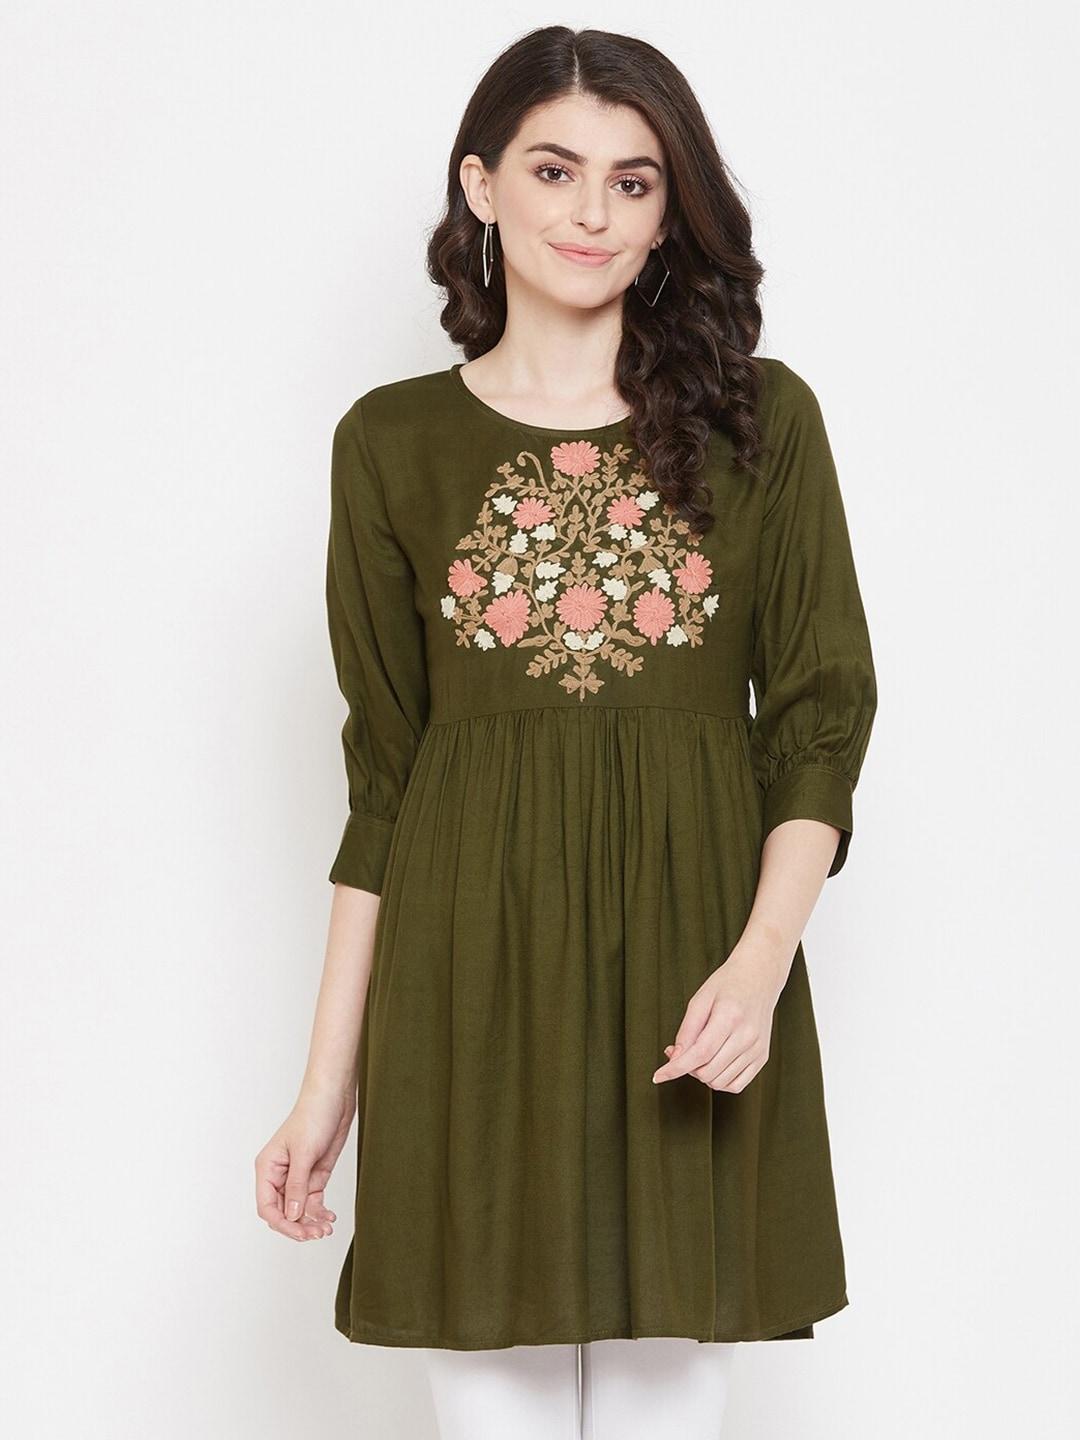 Ruhaans Women Green & Beige Viscose Rayon Floral Embroidered Tunic